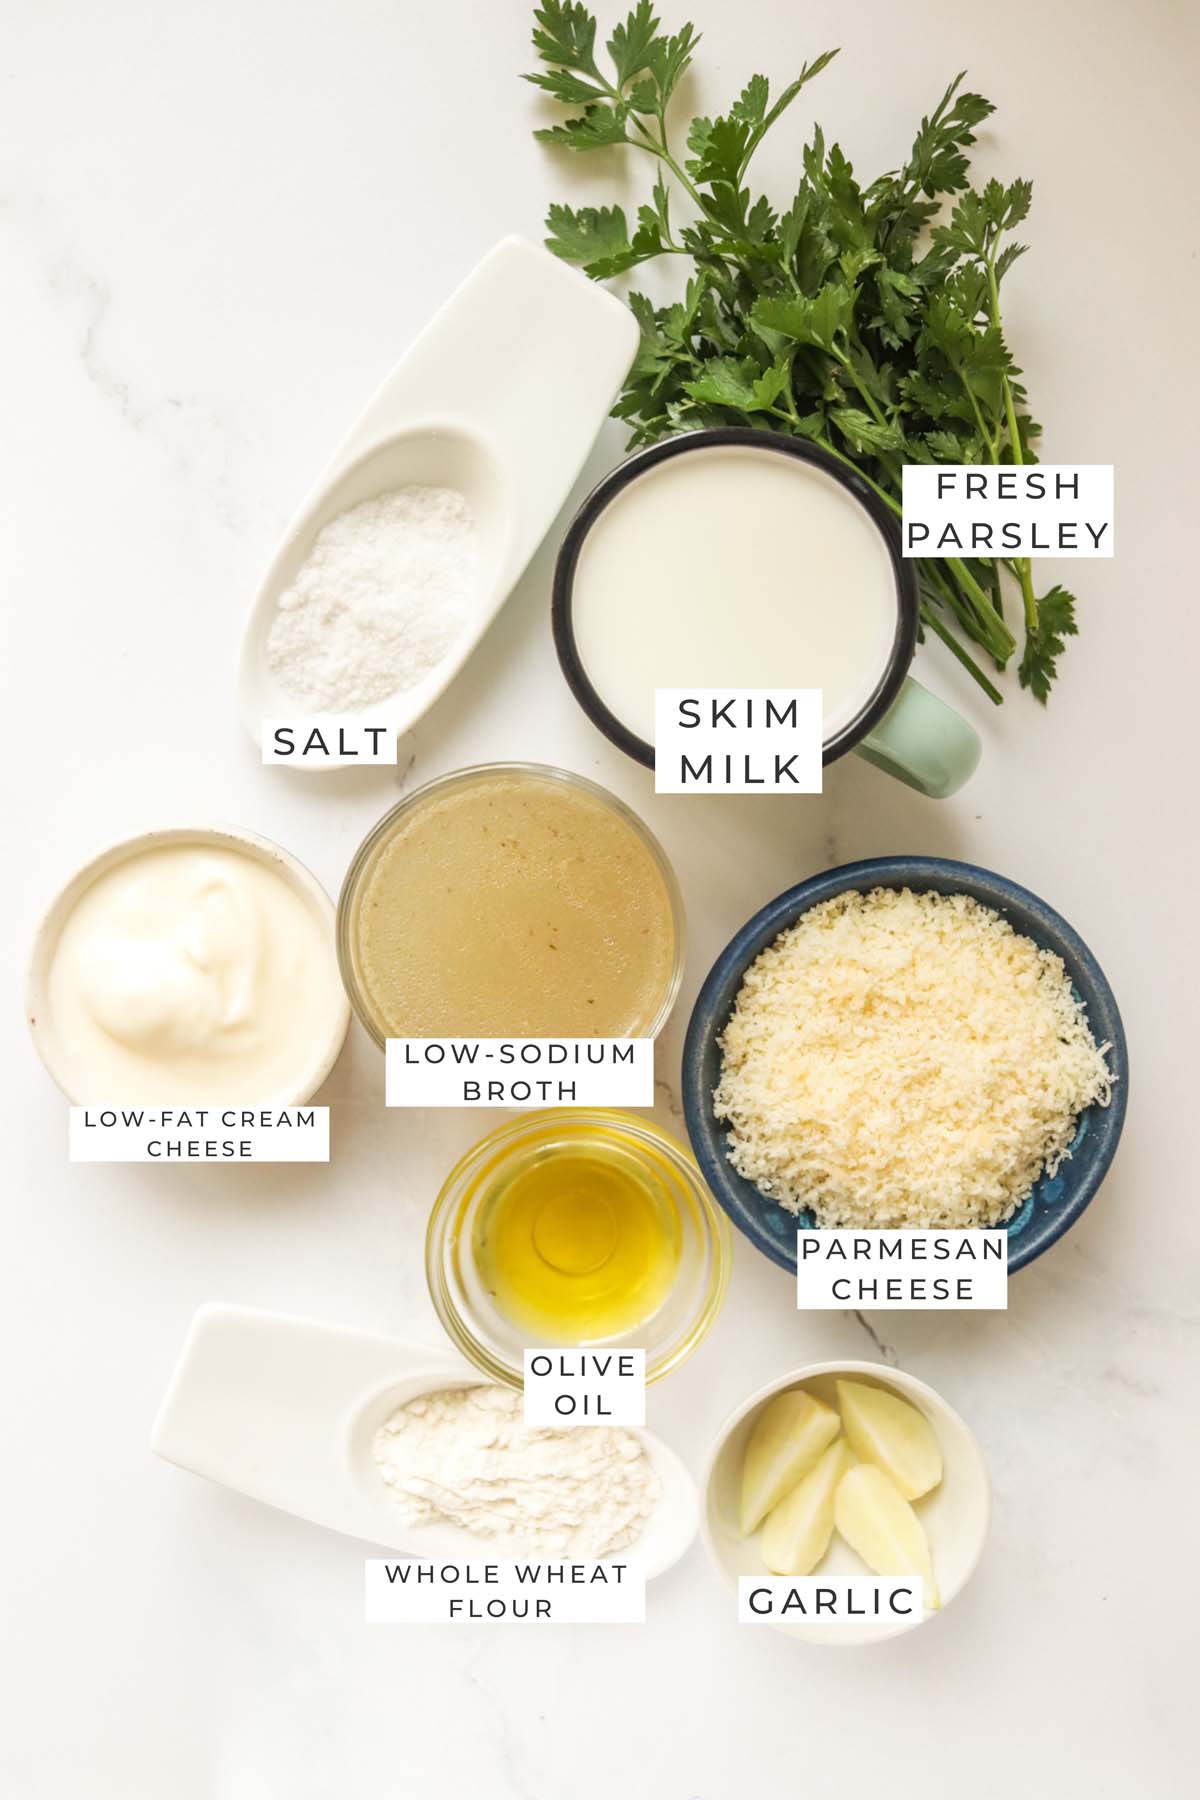 Labeled ingredients for the alfredo sauce.